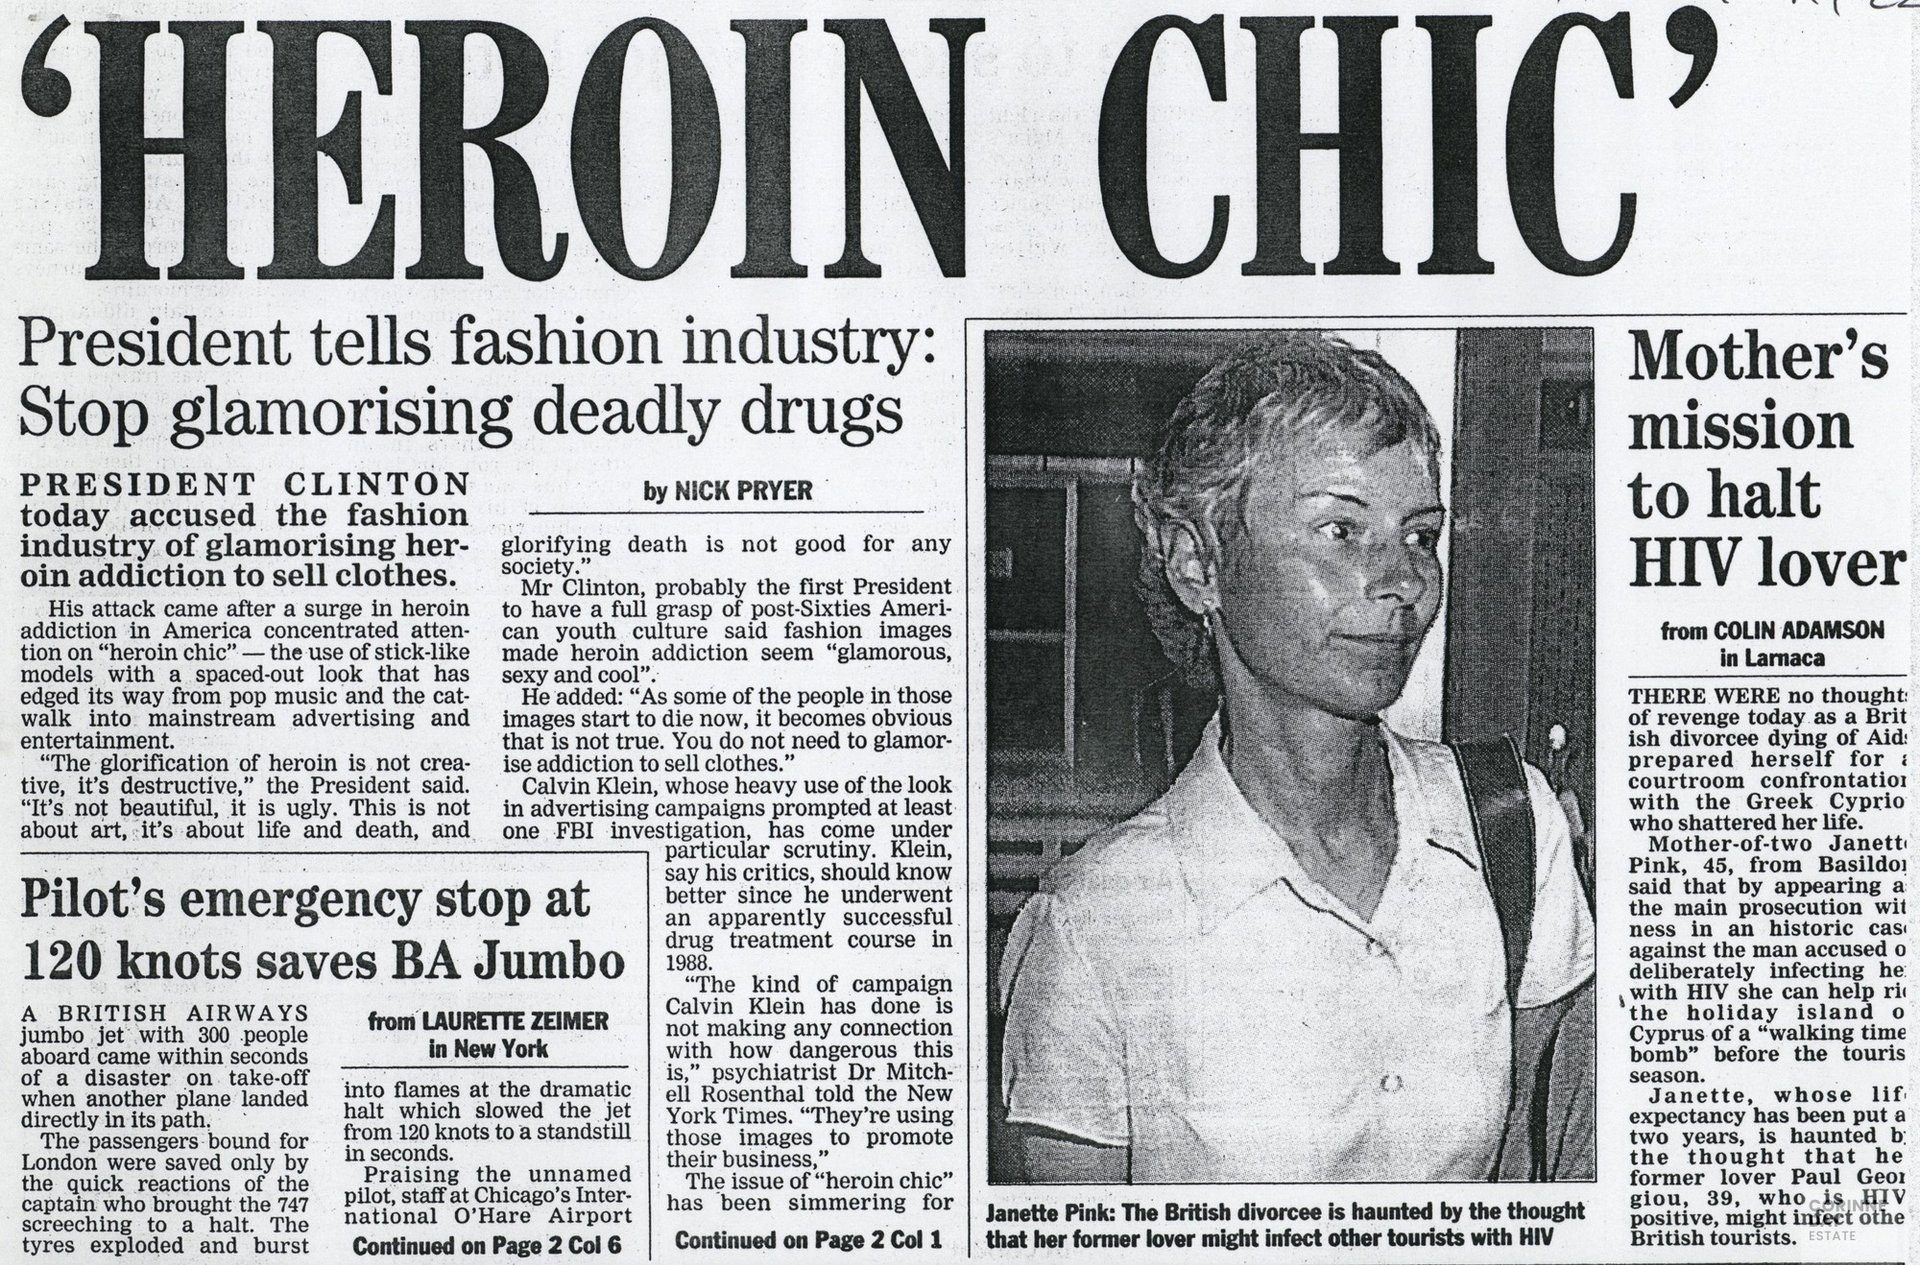 Heroin Chic, Evening Standard, 22 May 1997 — Image 1 of 2